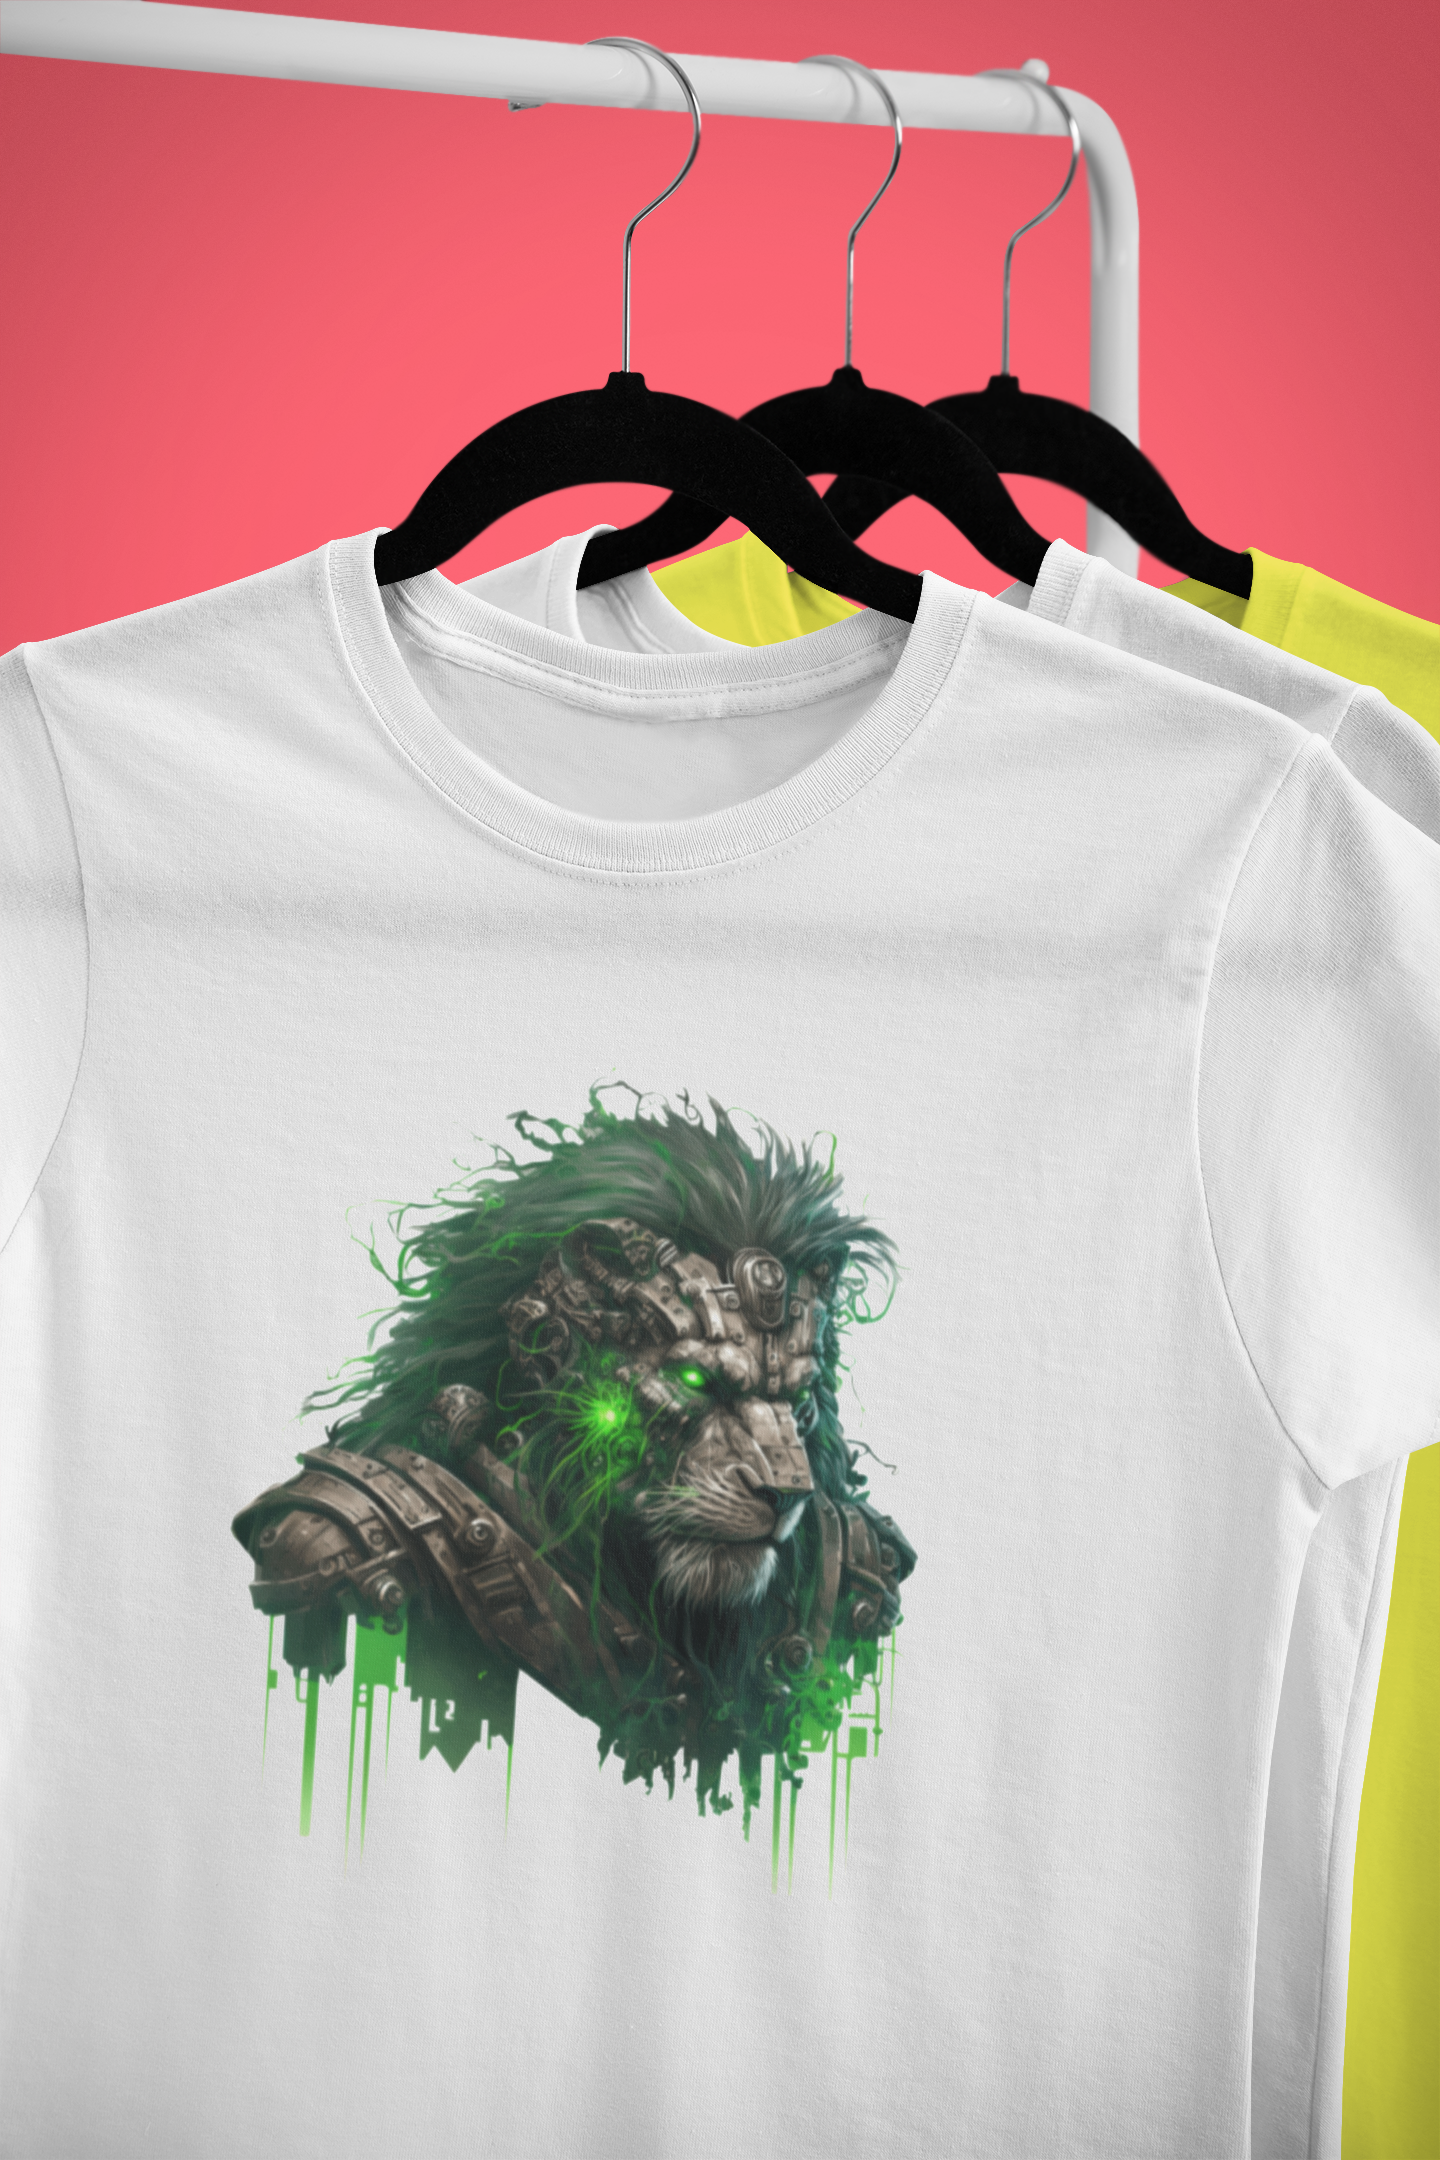 Premium Photo | Angry head of lion t shirt design for print design